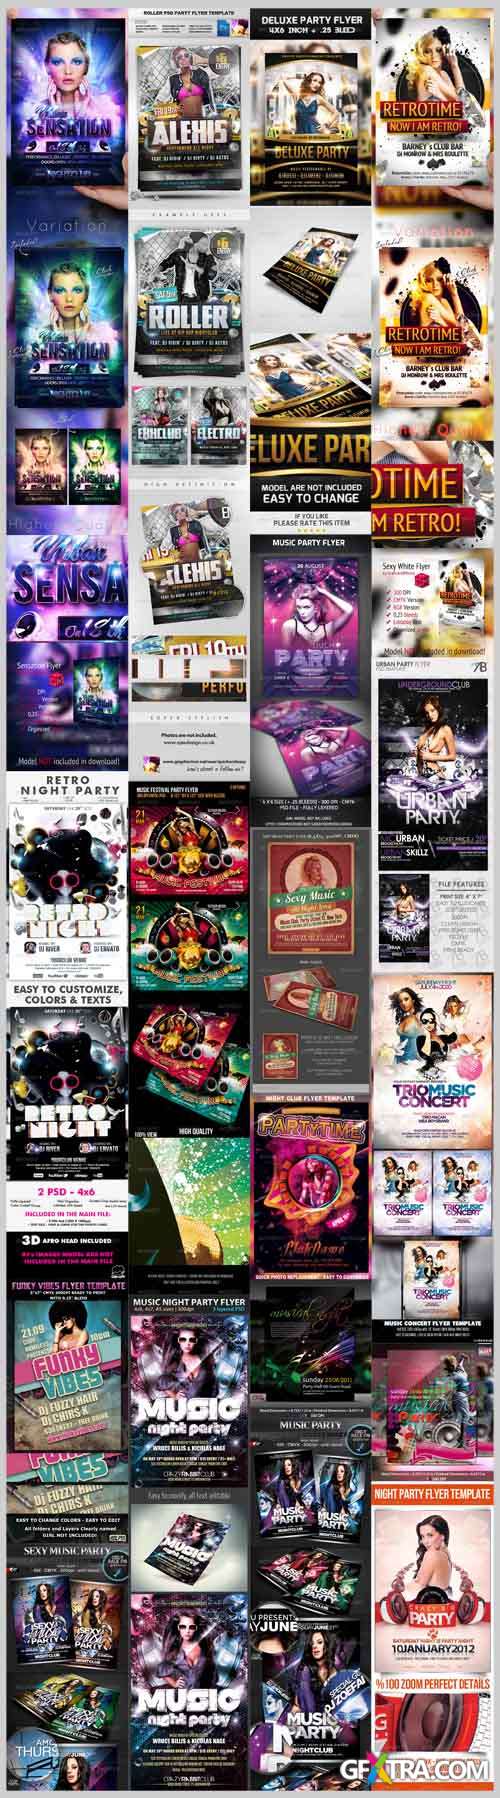 Music Flyers and Posters - Mix Bundle 2012